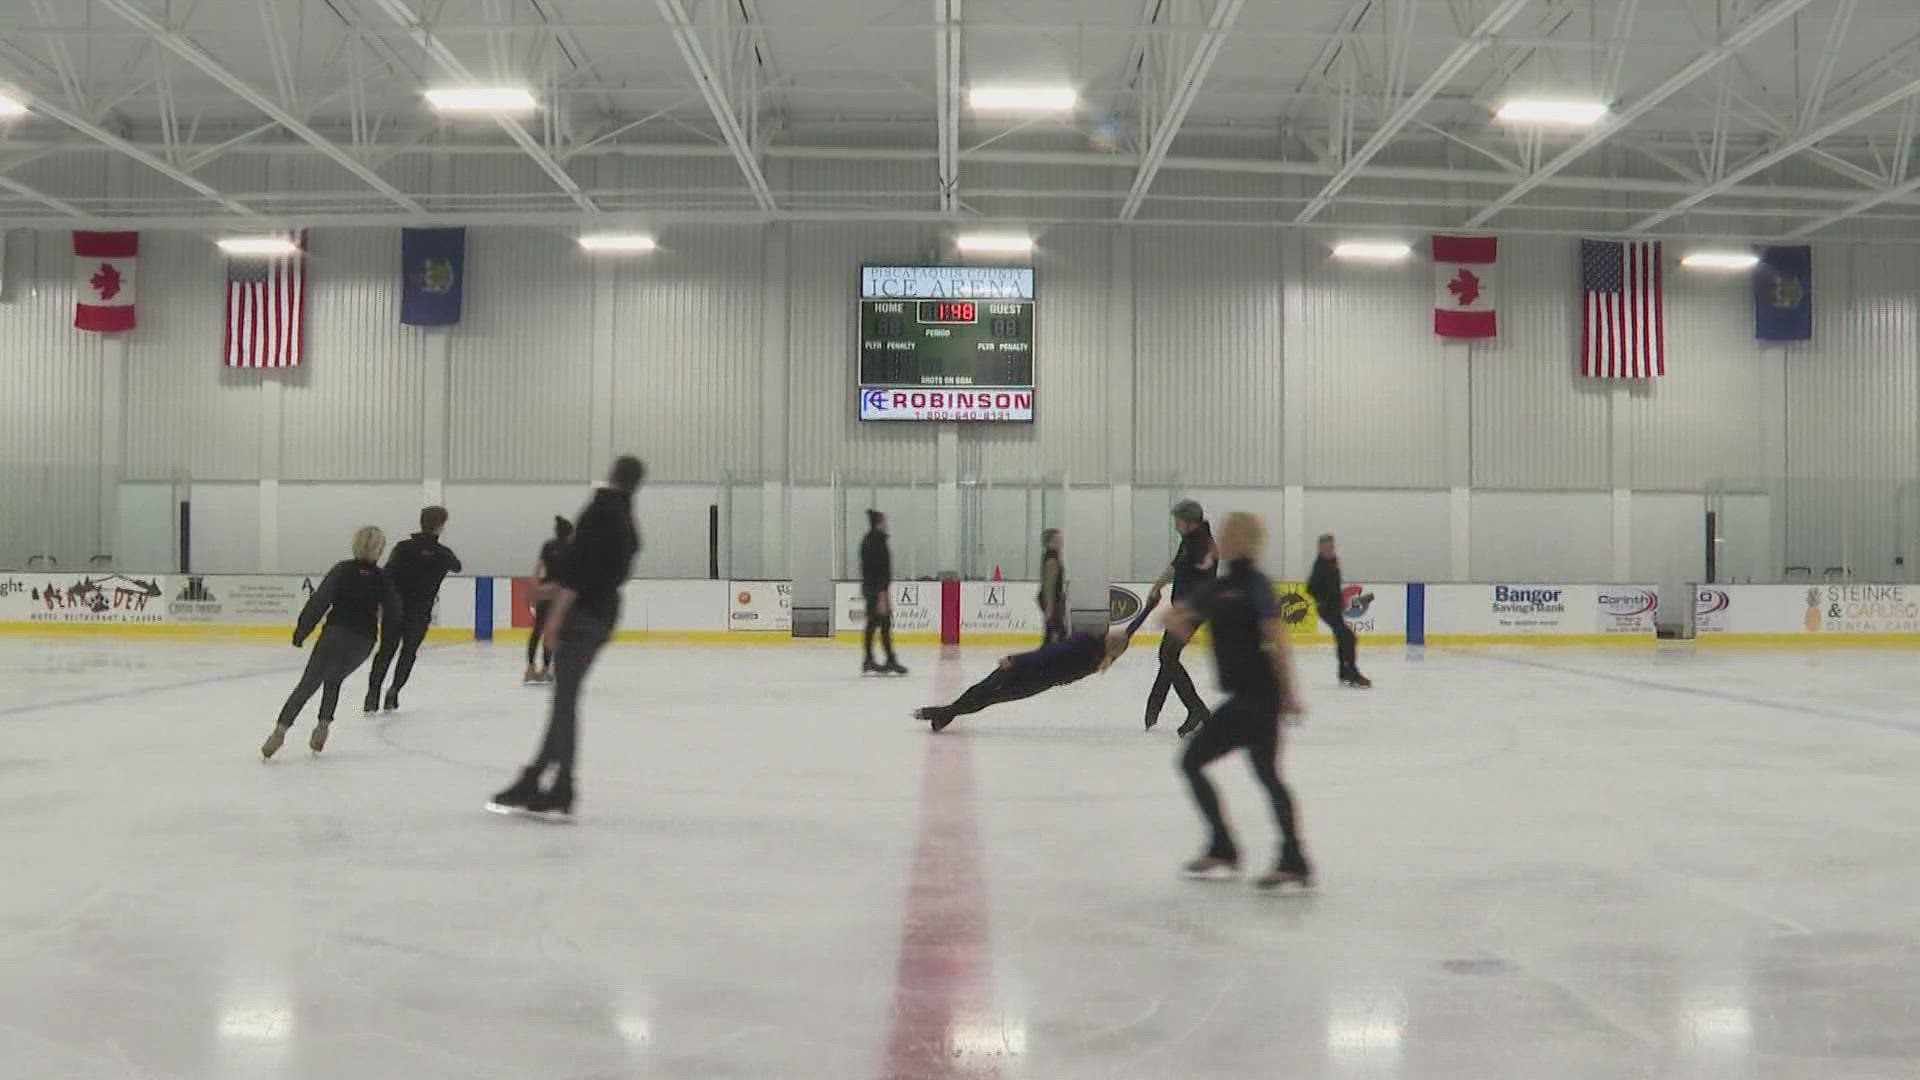 The ice dancing performing arts company, Ice Dance International, made its second stop on a 12-stop tour at the Piscataquis County Ice Arena.